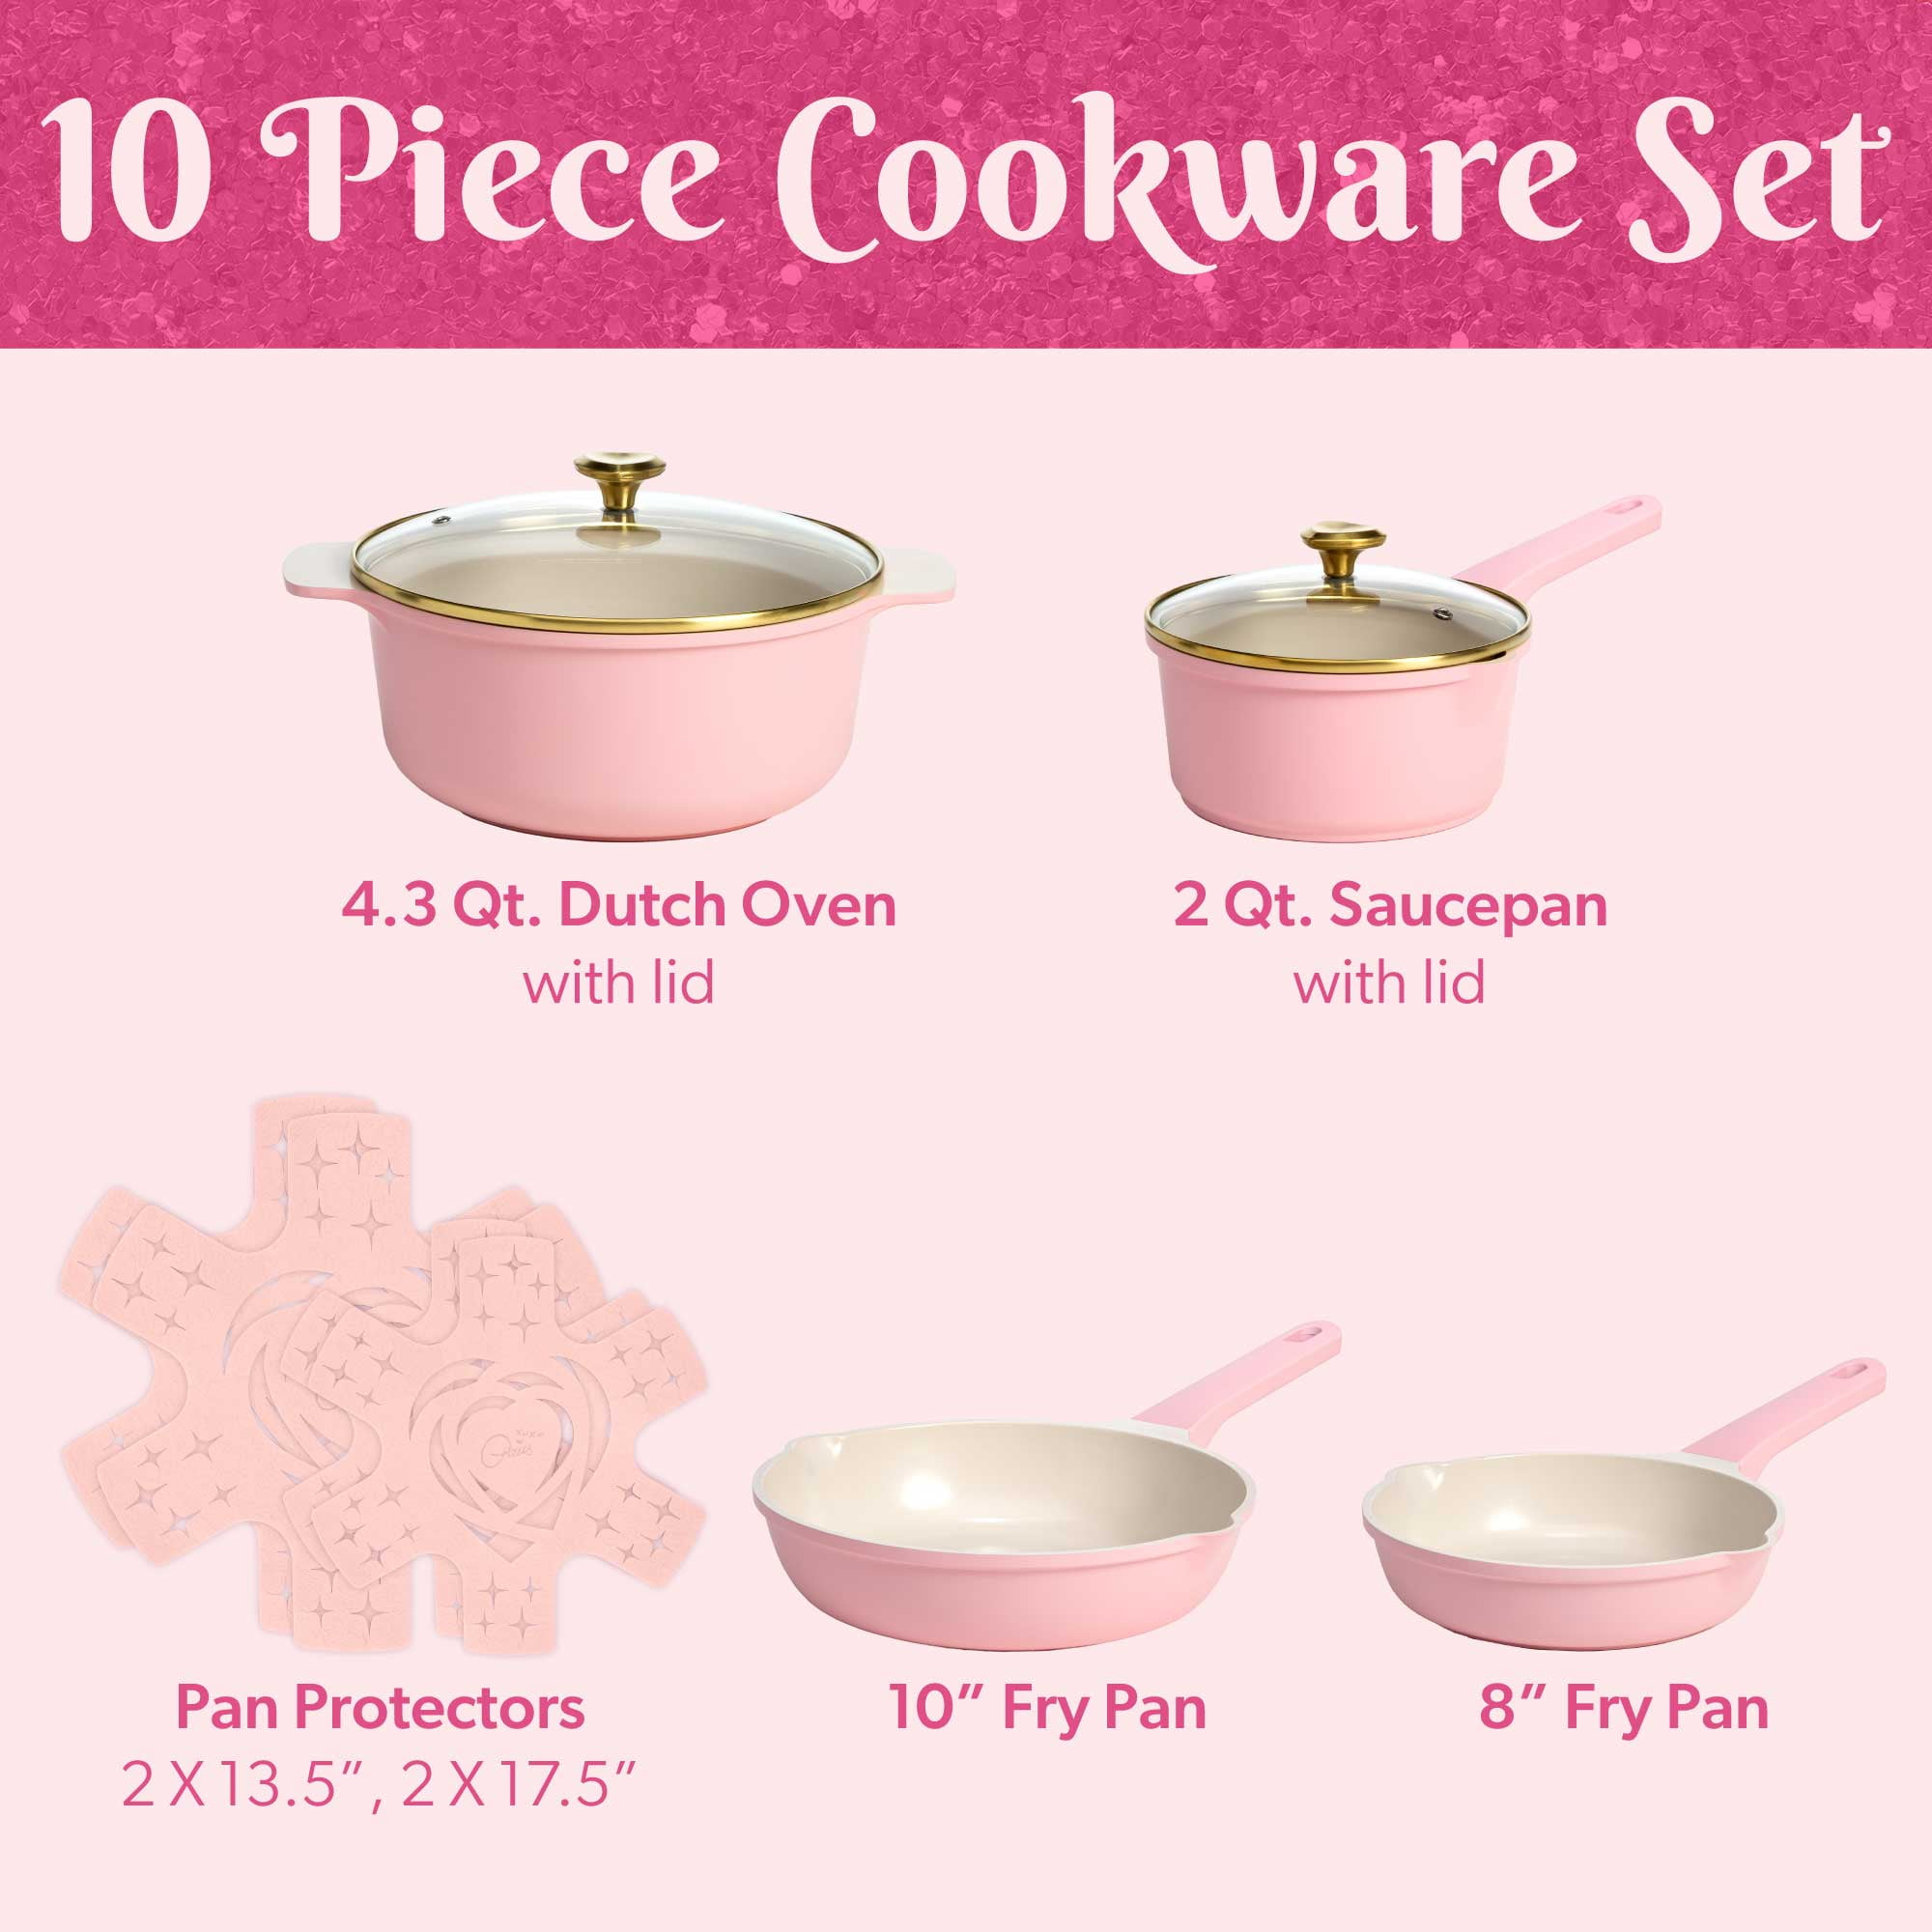 Paris Hilton's New Cookware Collection Has Us Totally 'Sliving